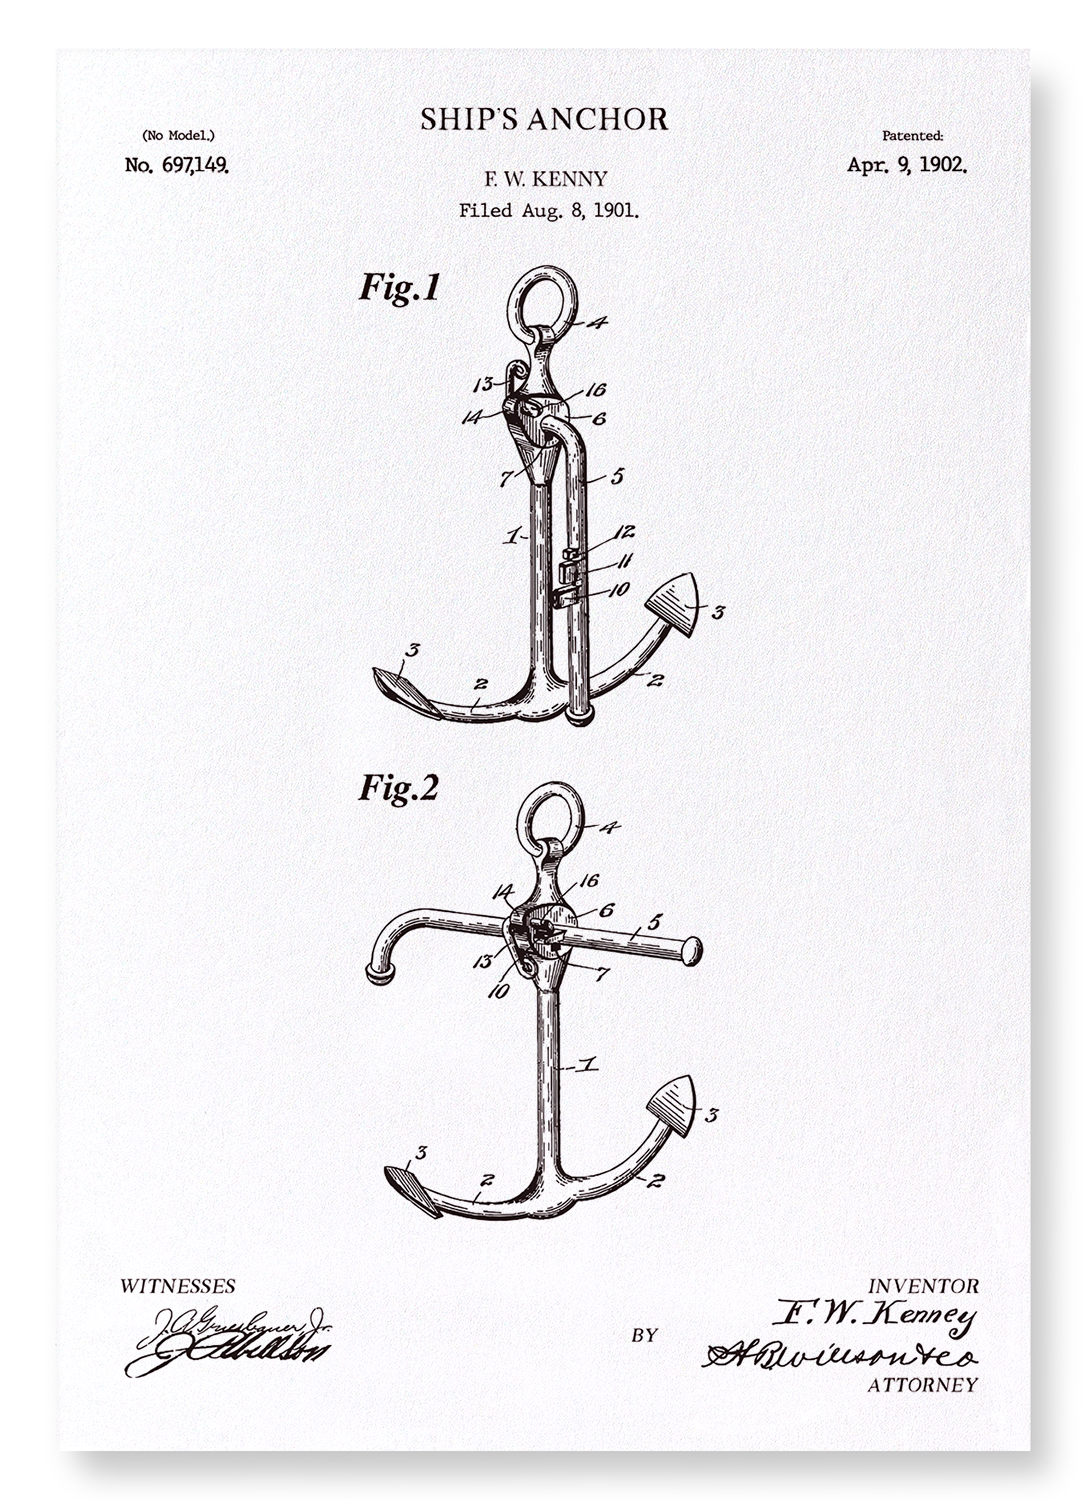 PATENT OF SHIP'S ANCHOR (1902): Patent Art Print